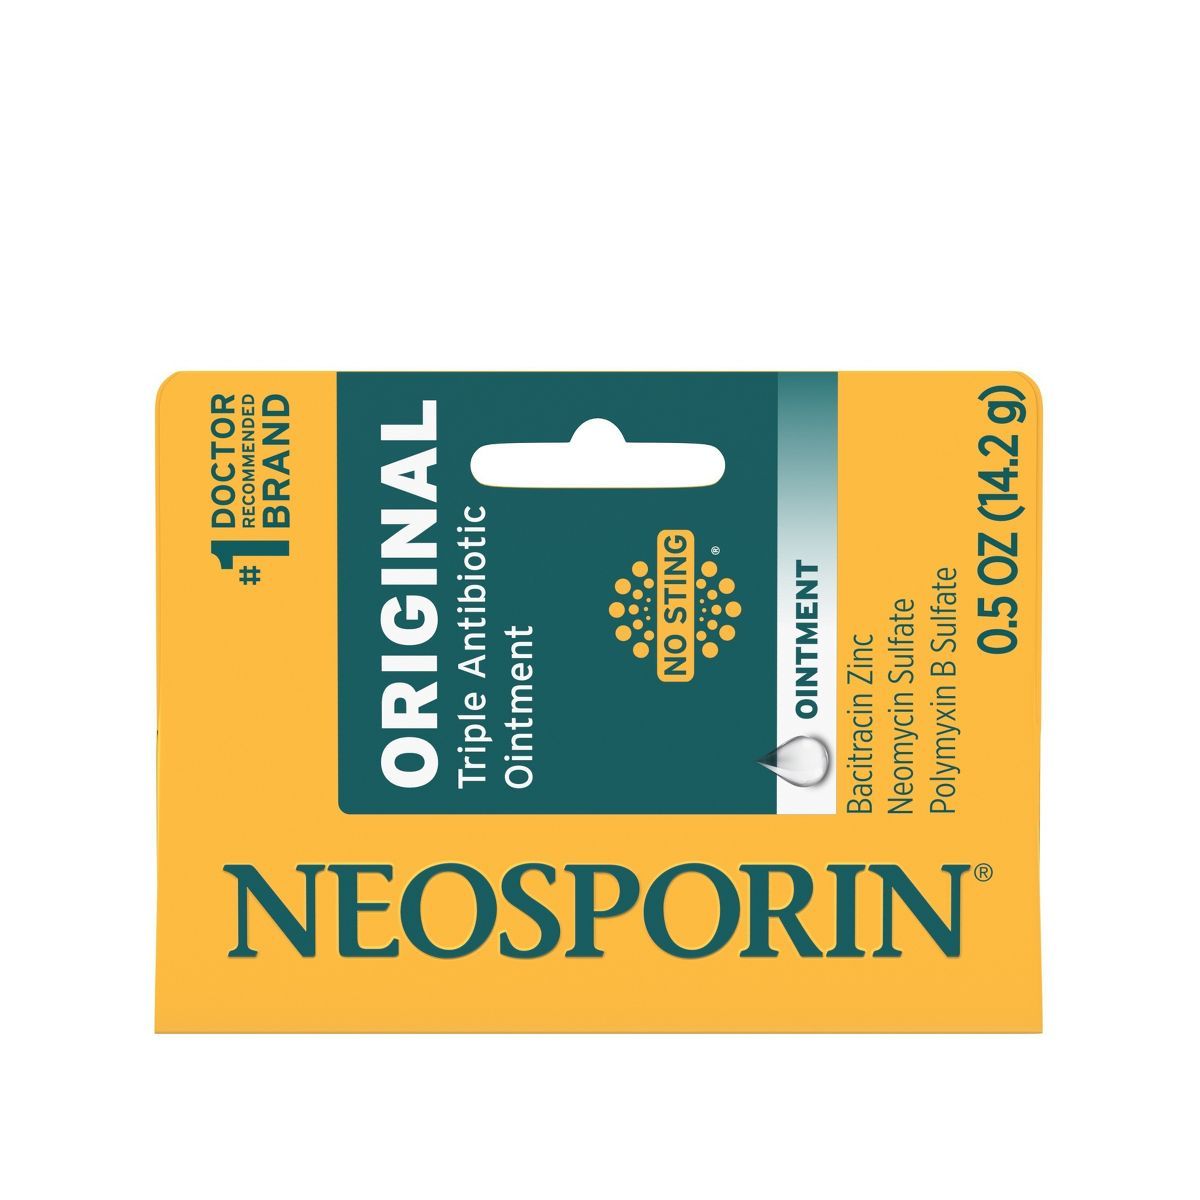 Neosporin 24 Hour Infection Protection Antibiotic Ointment - 0.5oz | Target